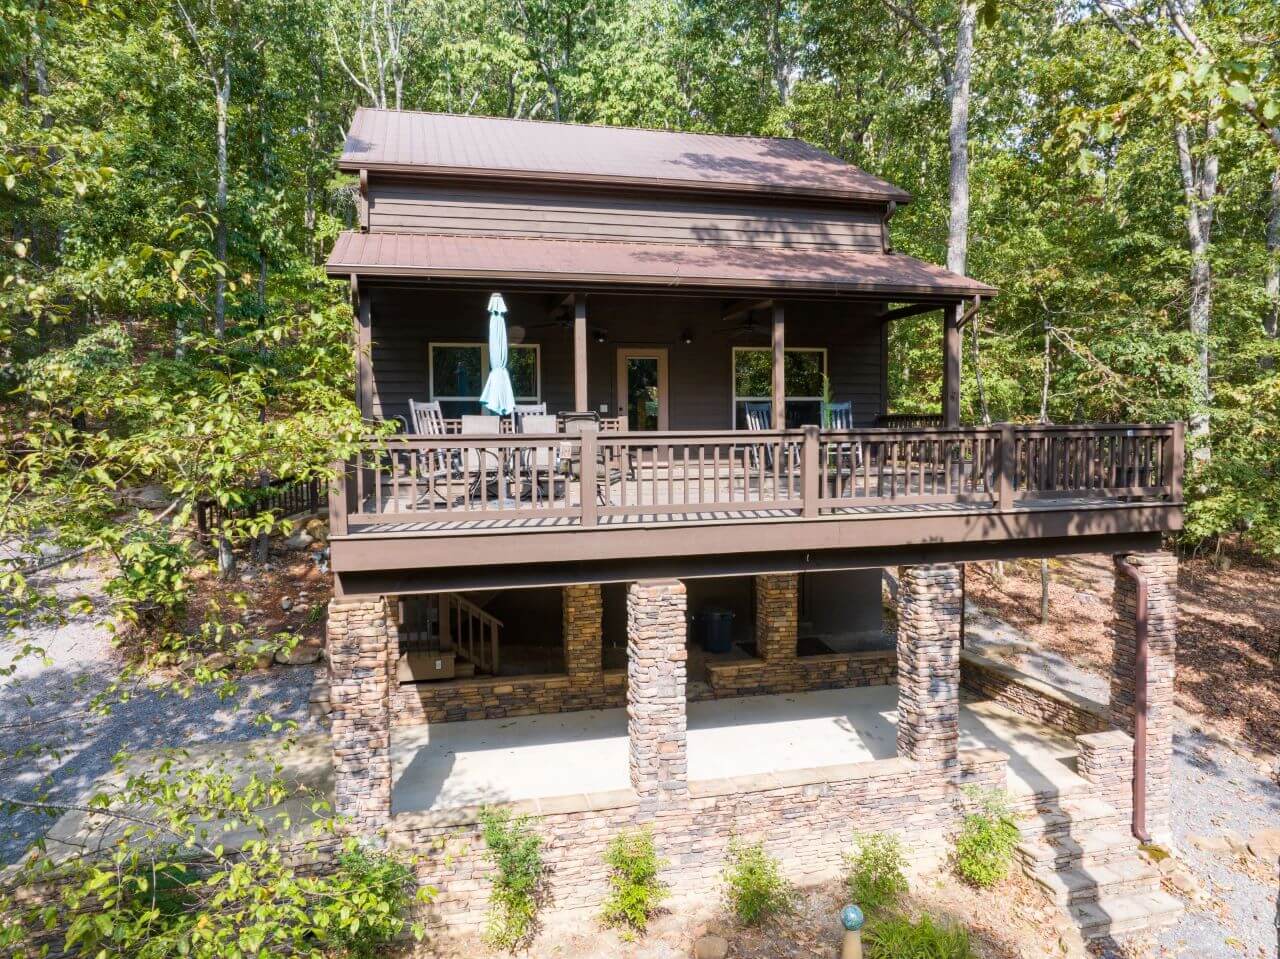 A scenic aerial view of a cozy cabin nestled in the woods of Mentone.